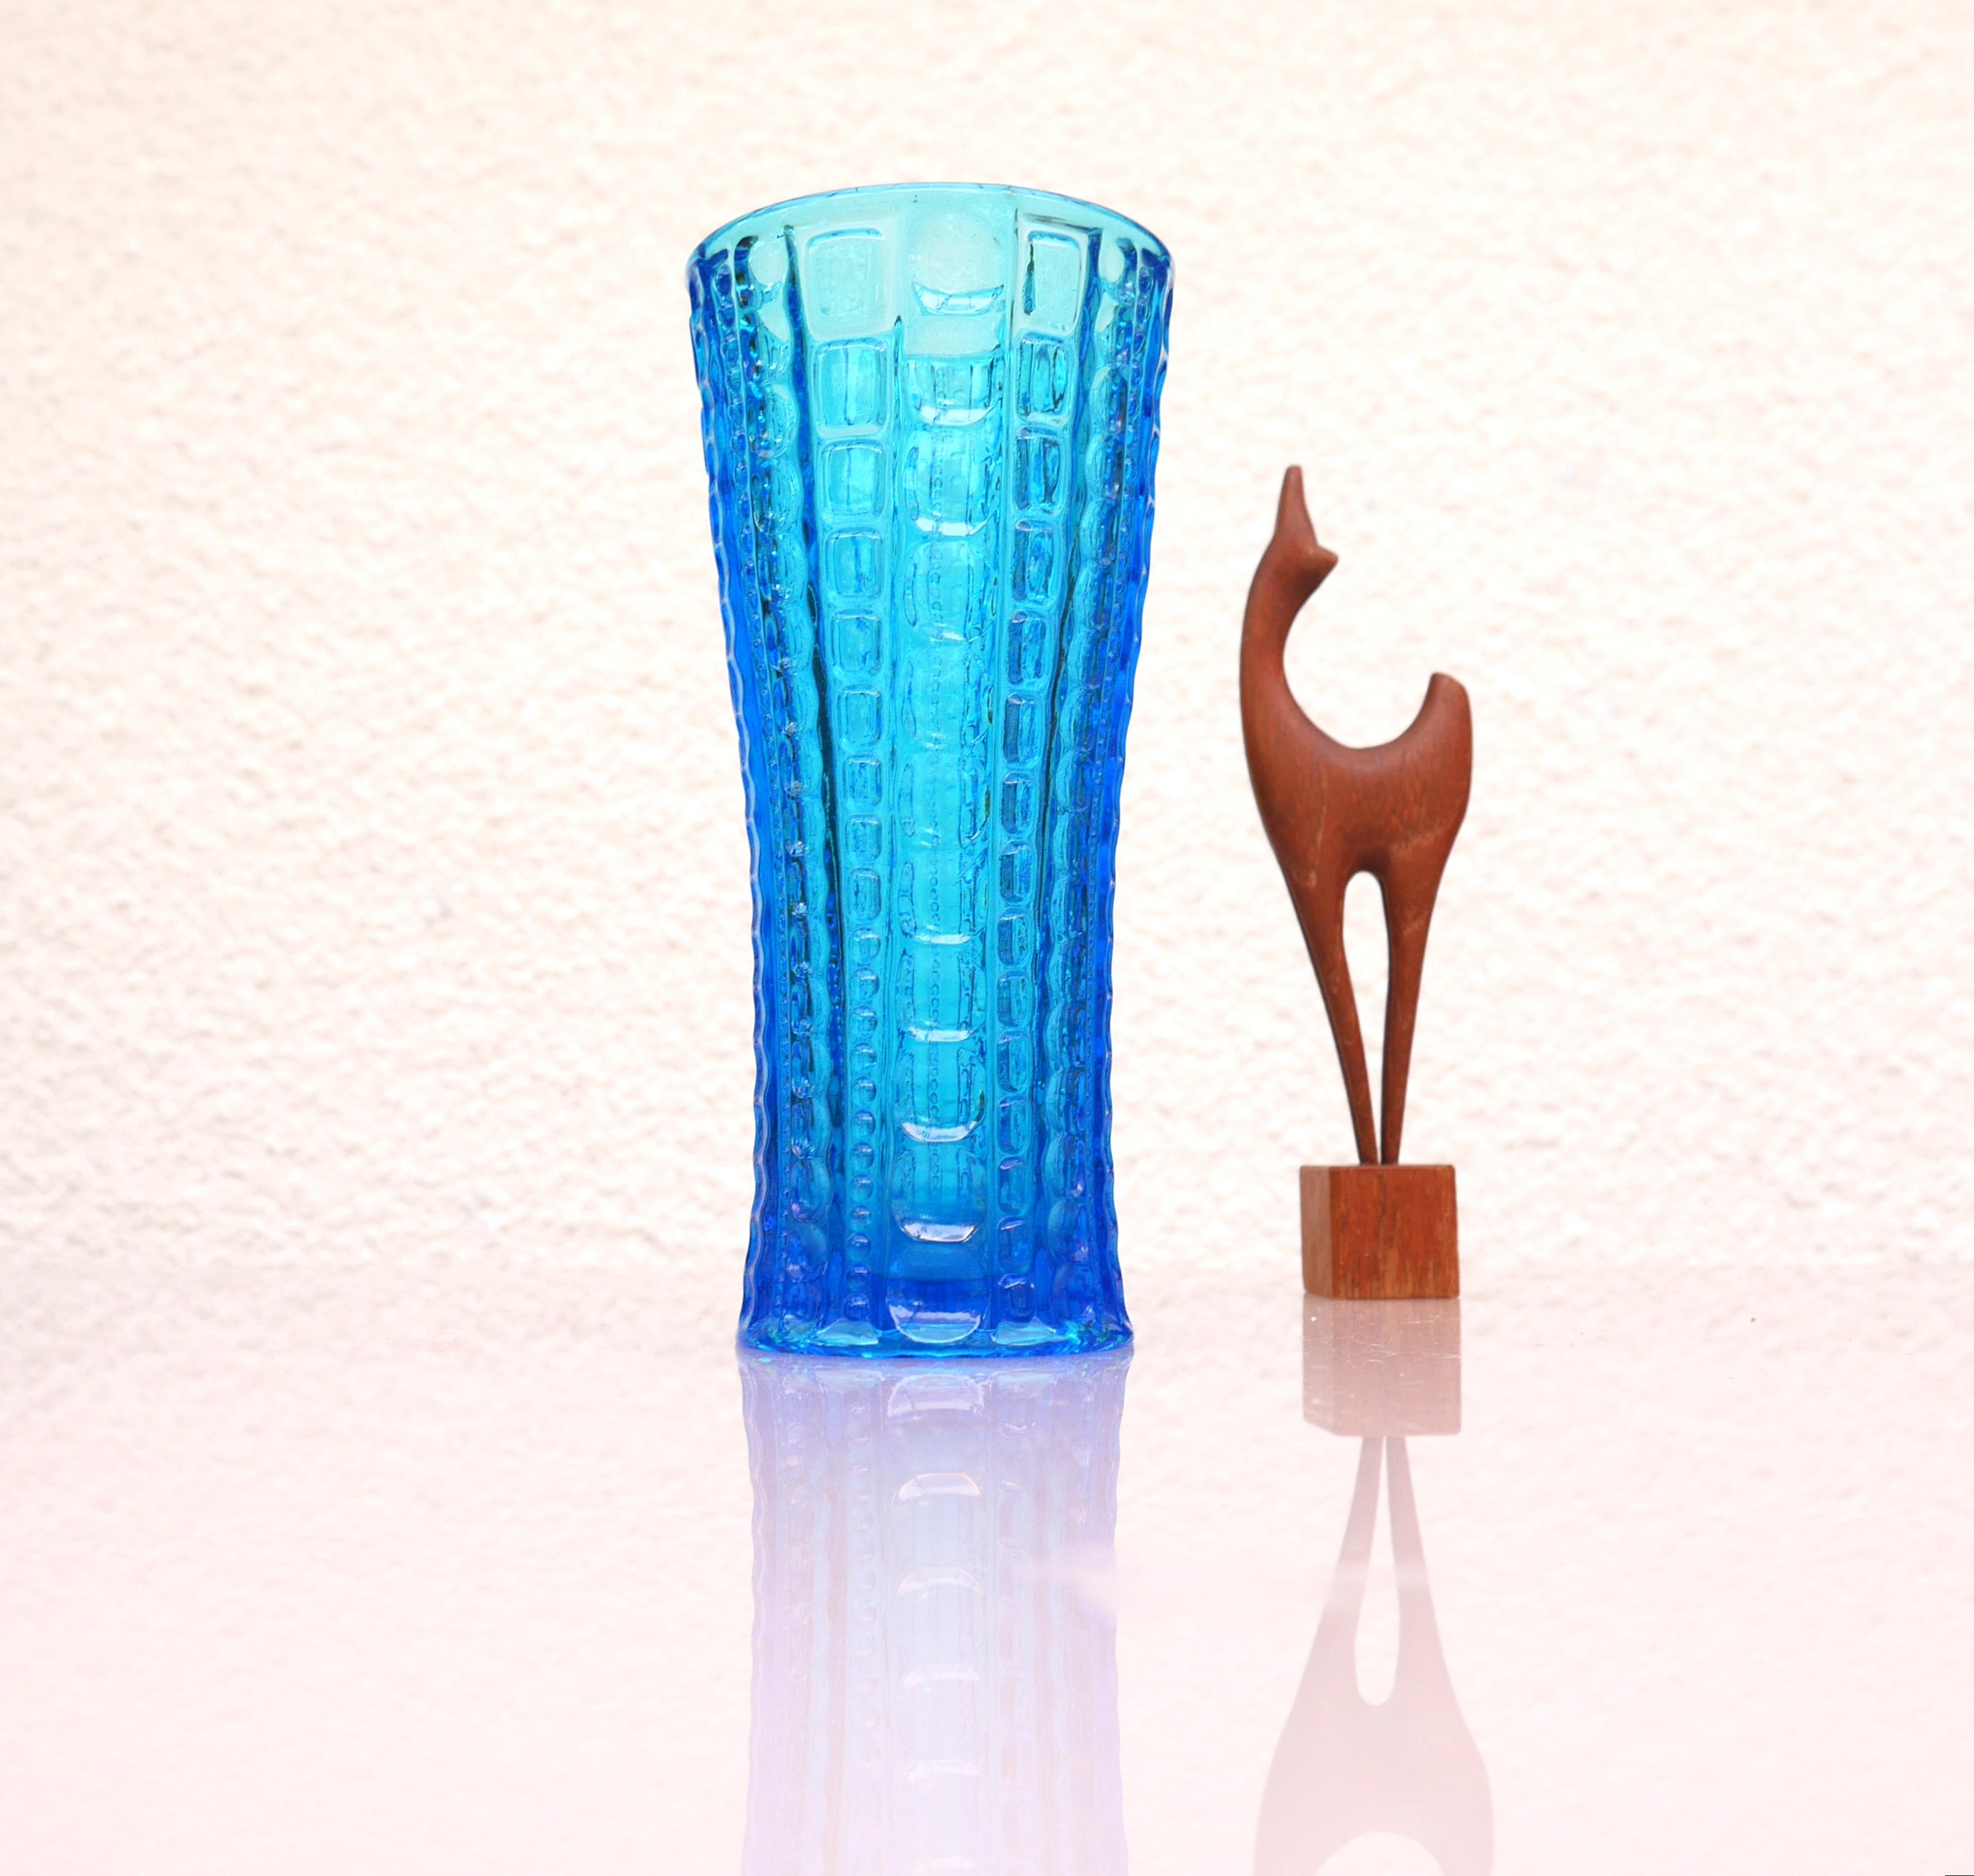 Mid-20th Century Mid-century modern glass vase by Jan Sylwester Drost for Ząbkowice, Poland.